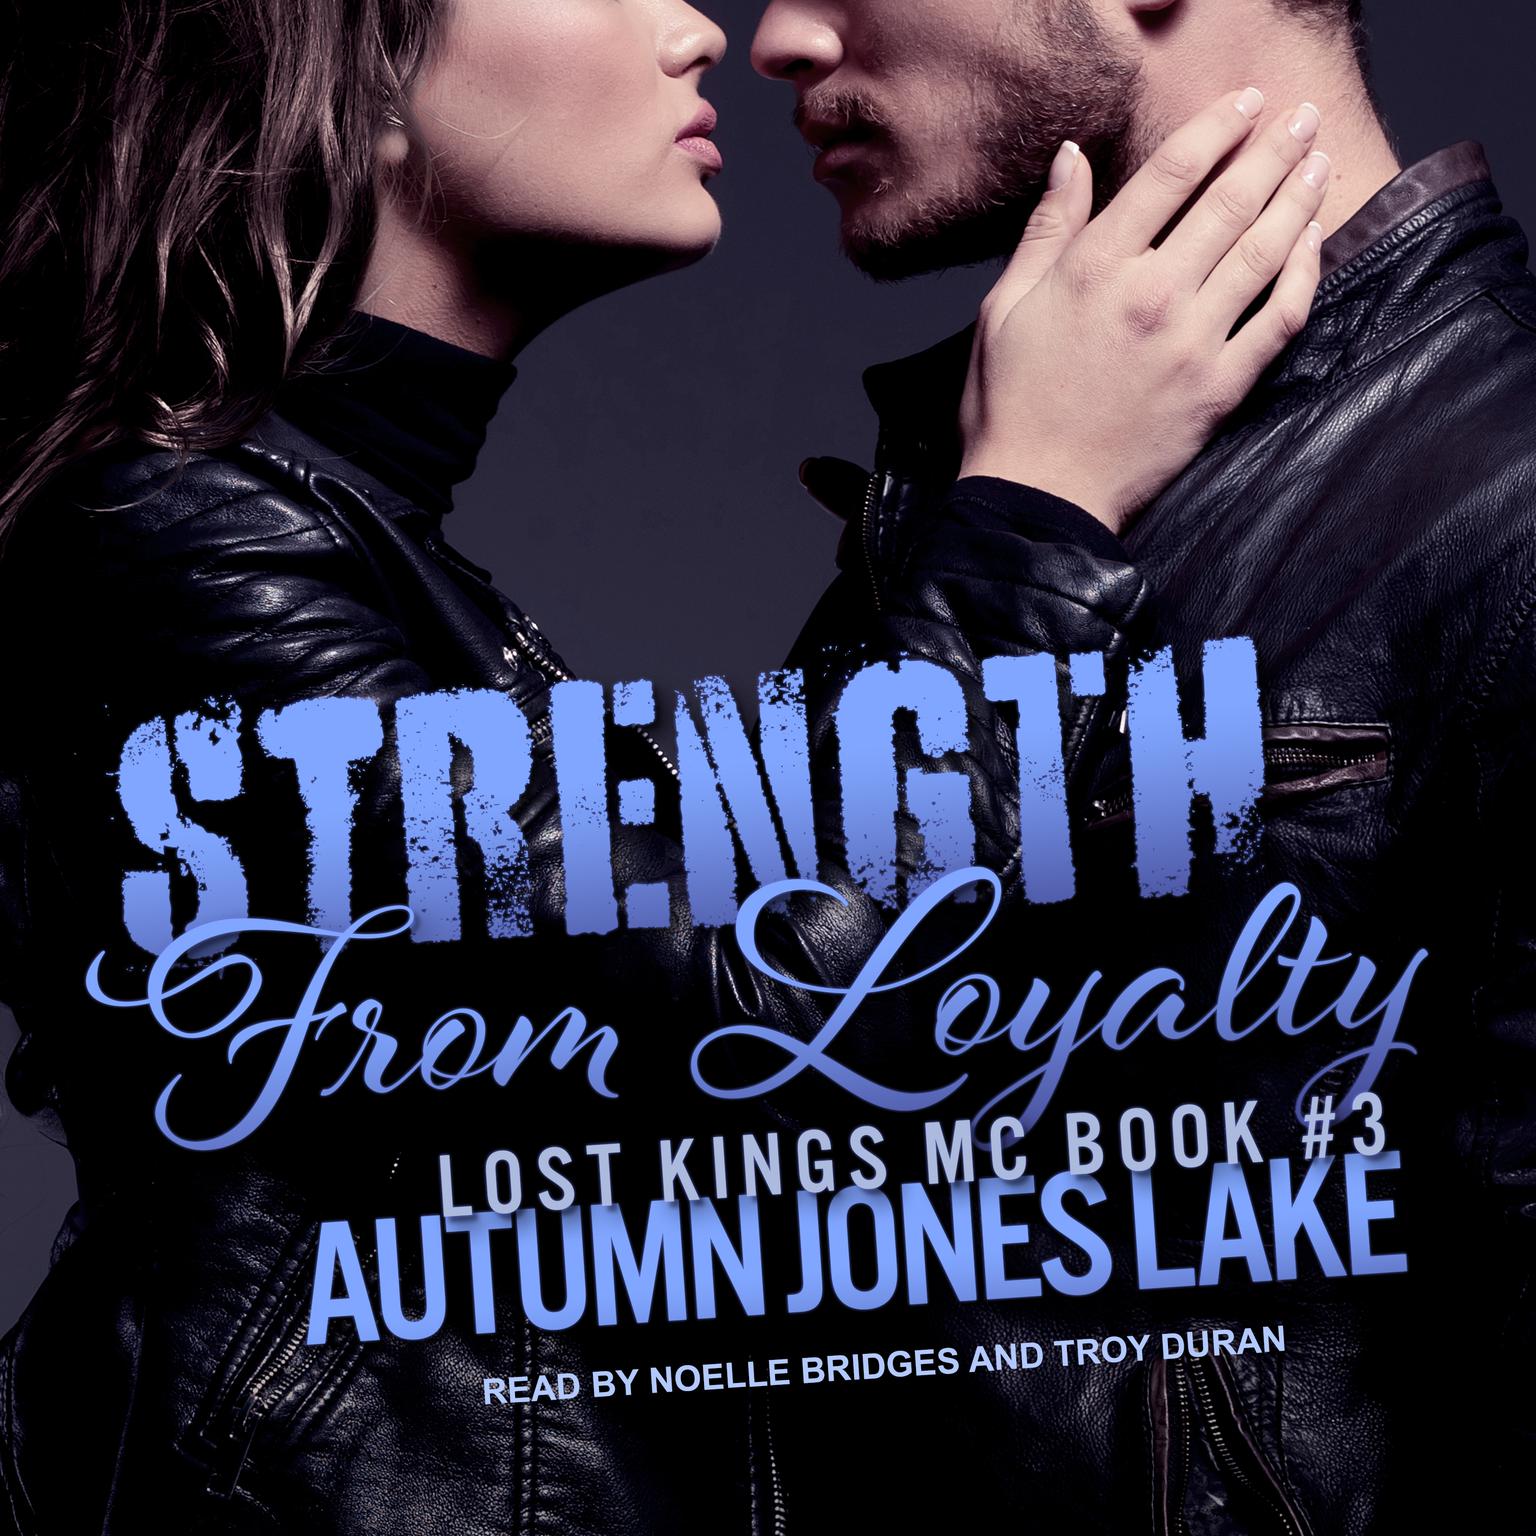 Strength From Loyalty Audiobook, by Autumn Jones Lake